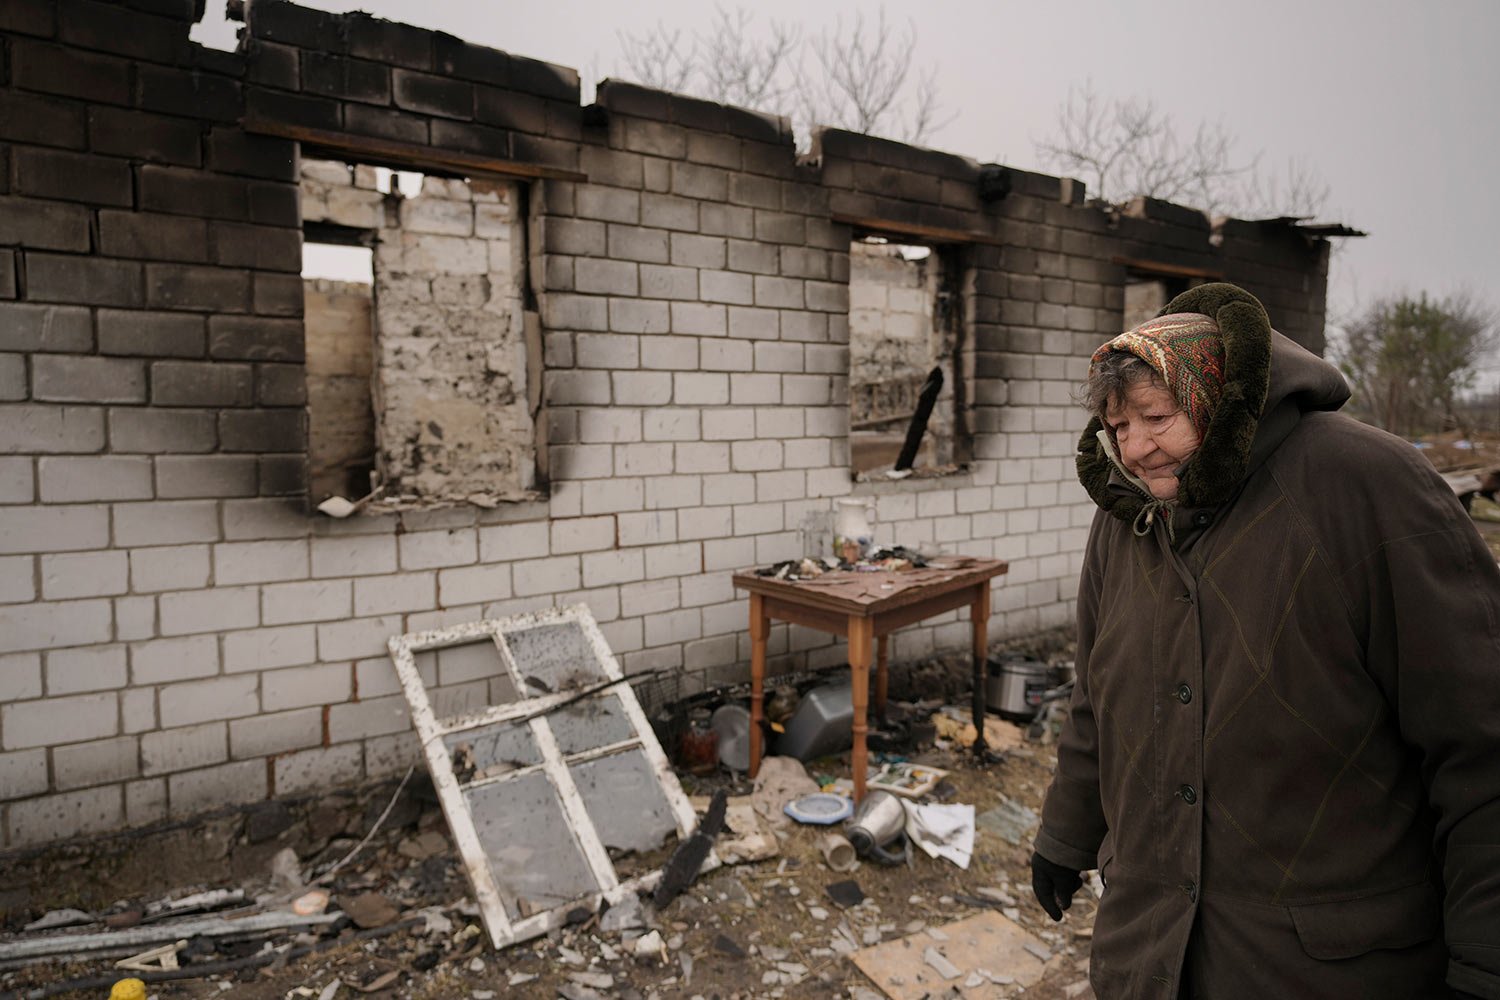  A woman walks by a house destroyed while her village was occupied by Russian troops in Andriivka, Ukraine, Tuesday, April 5, 2022. (AP Photo/Vadim Ghirda) 